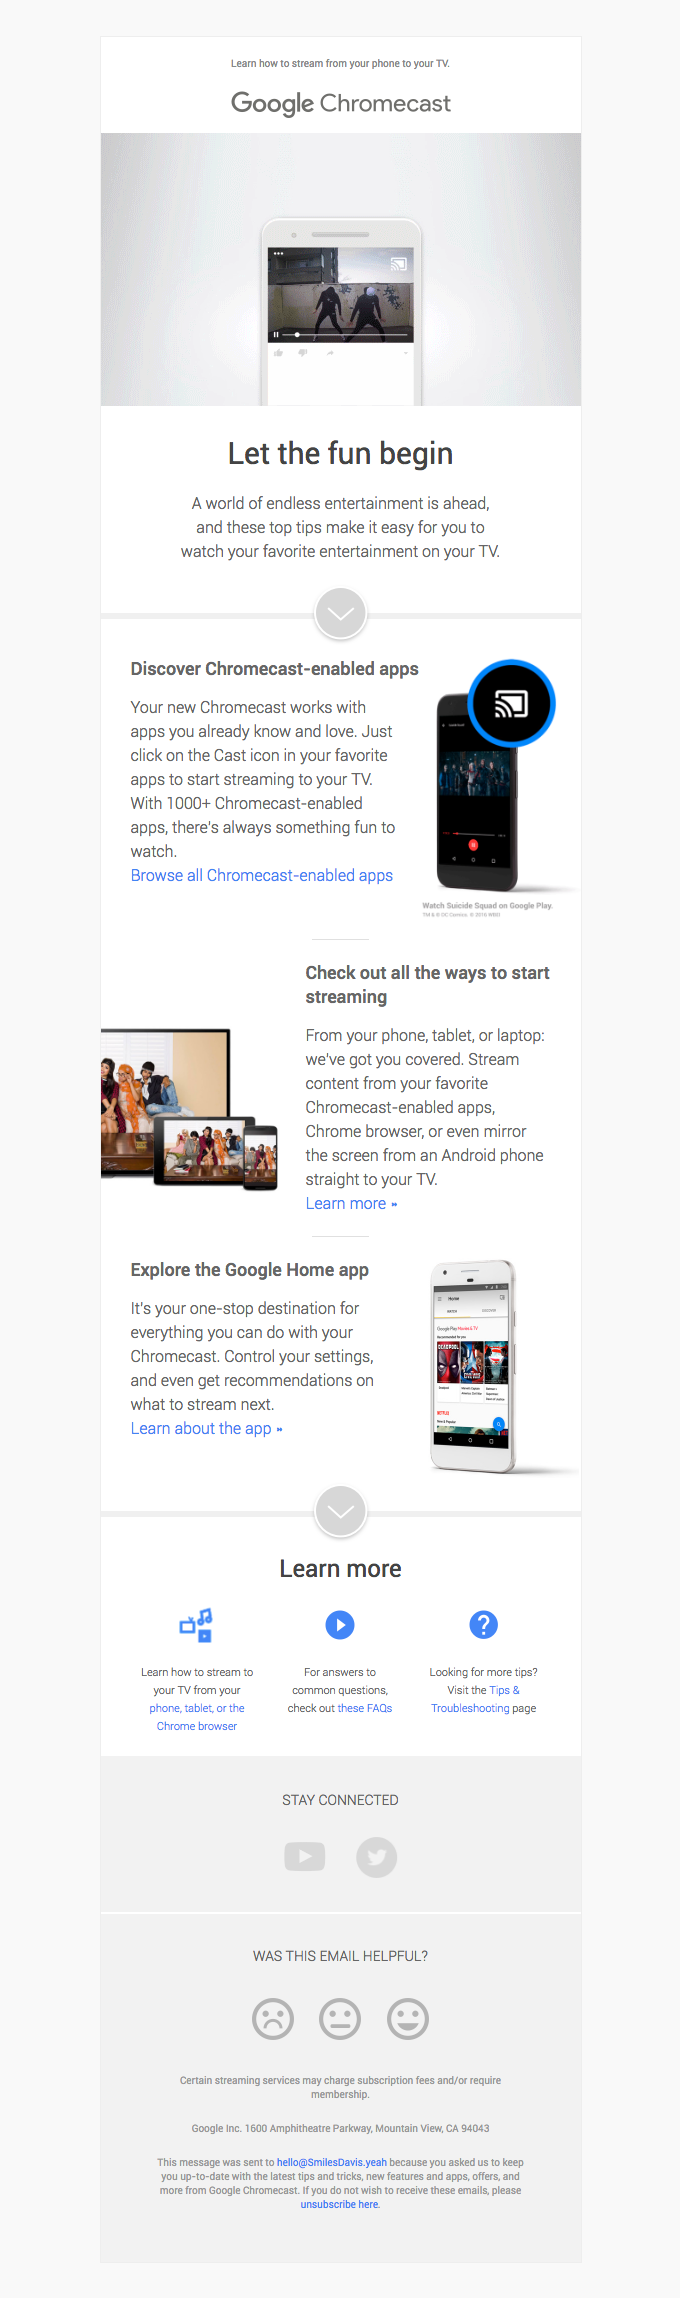 Get the most from your new Chromecast from Google - Desktop Email View | Good Emails